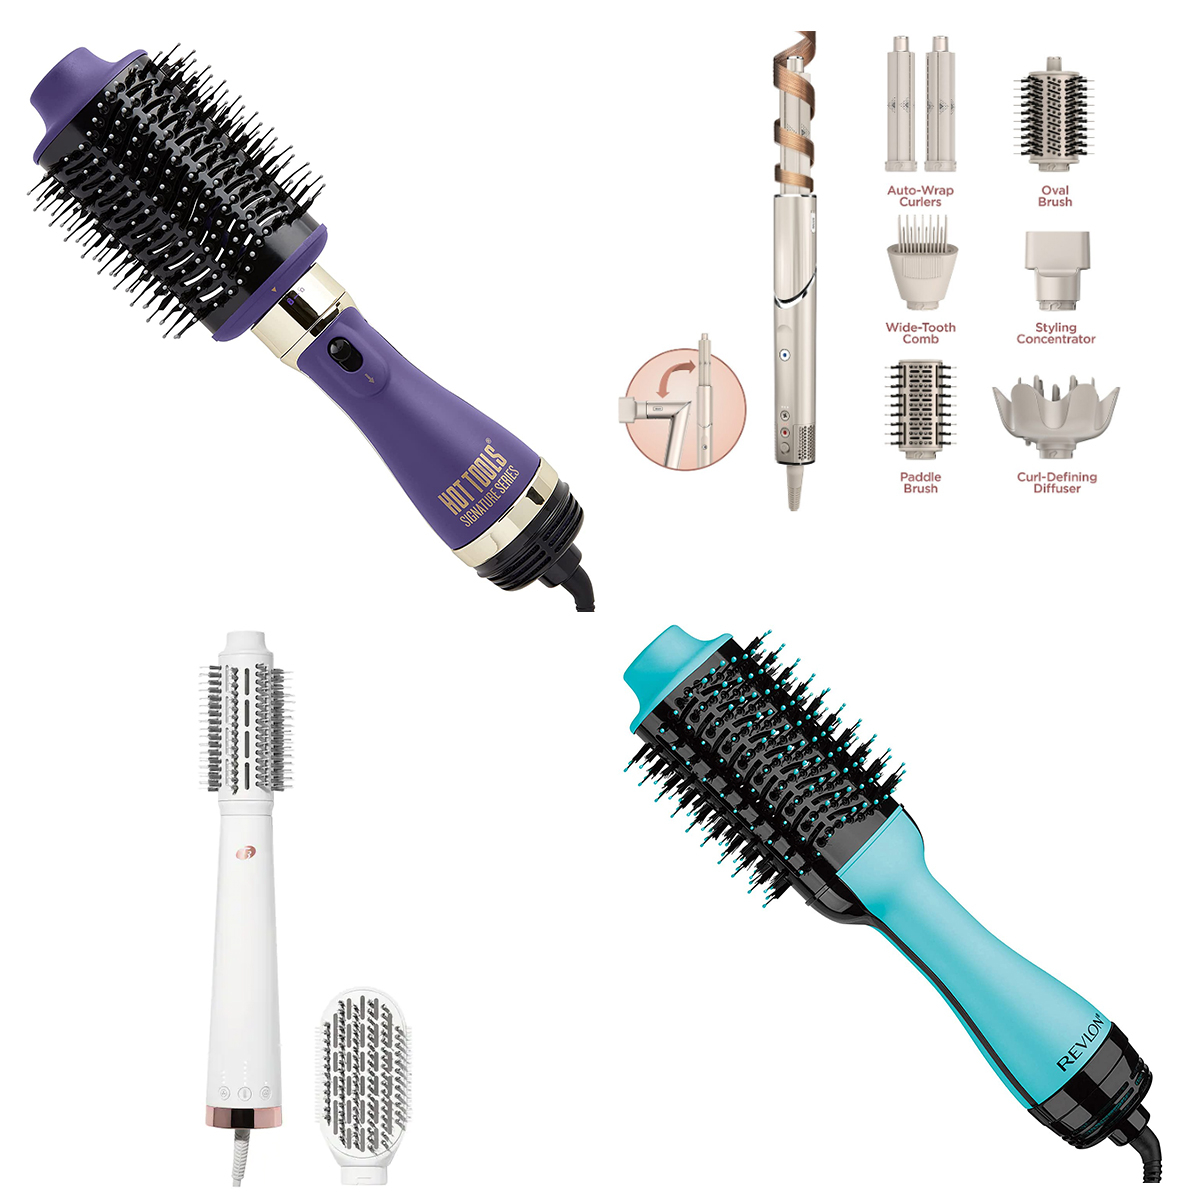 The Hot Tools Volumizer 2-in-1 Brush Dryer Review